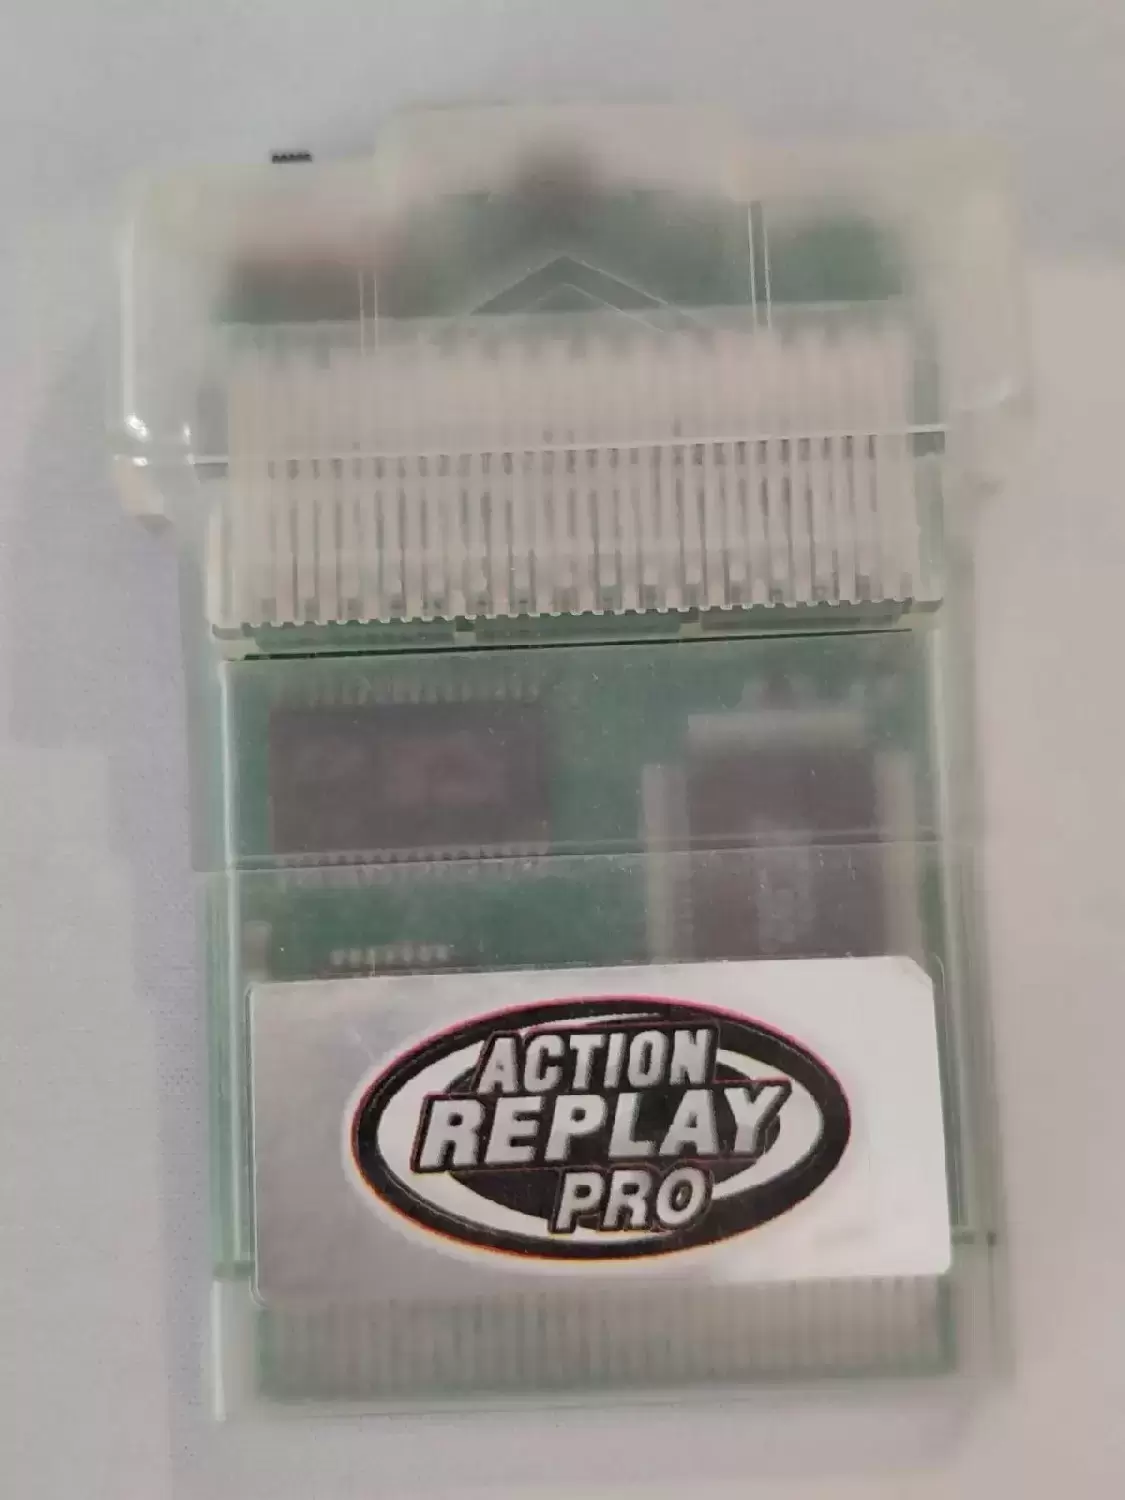 Game Boy - Action Replay Pro